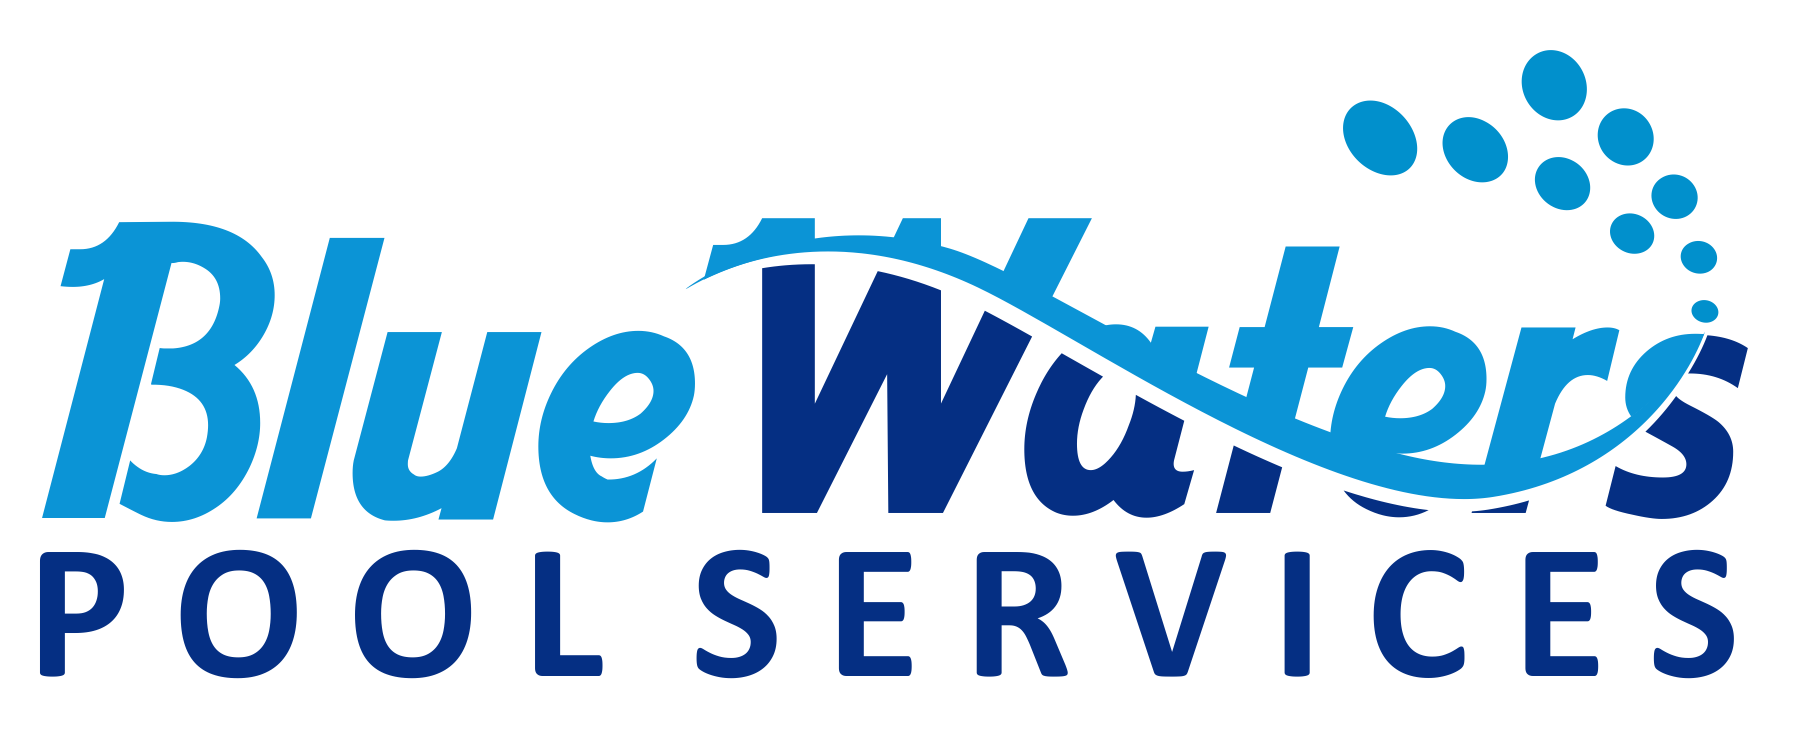 blue-water-pool-service-logo.png